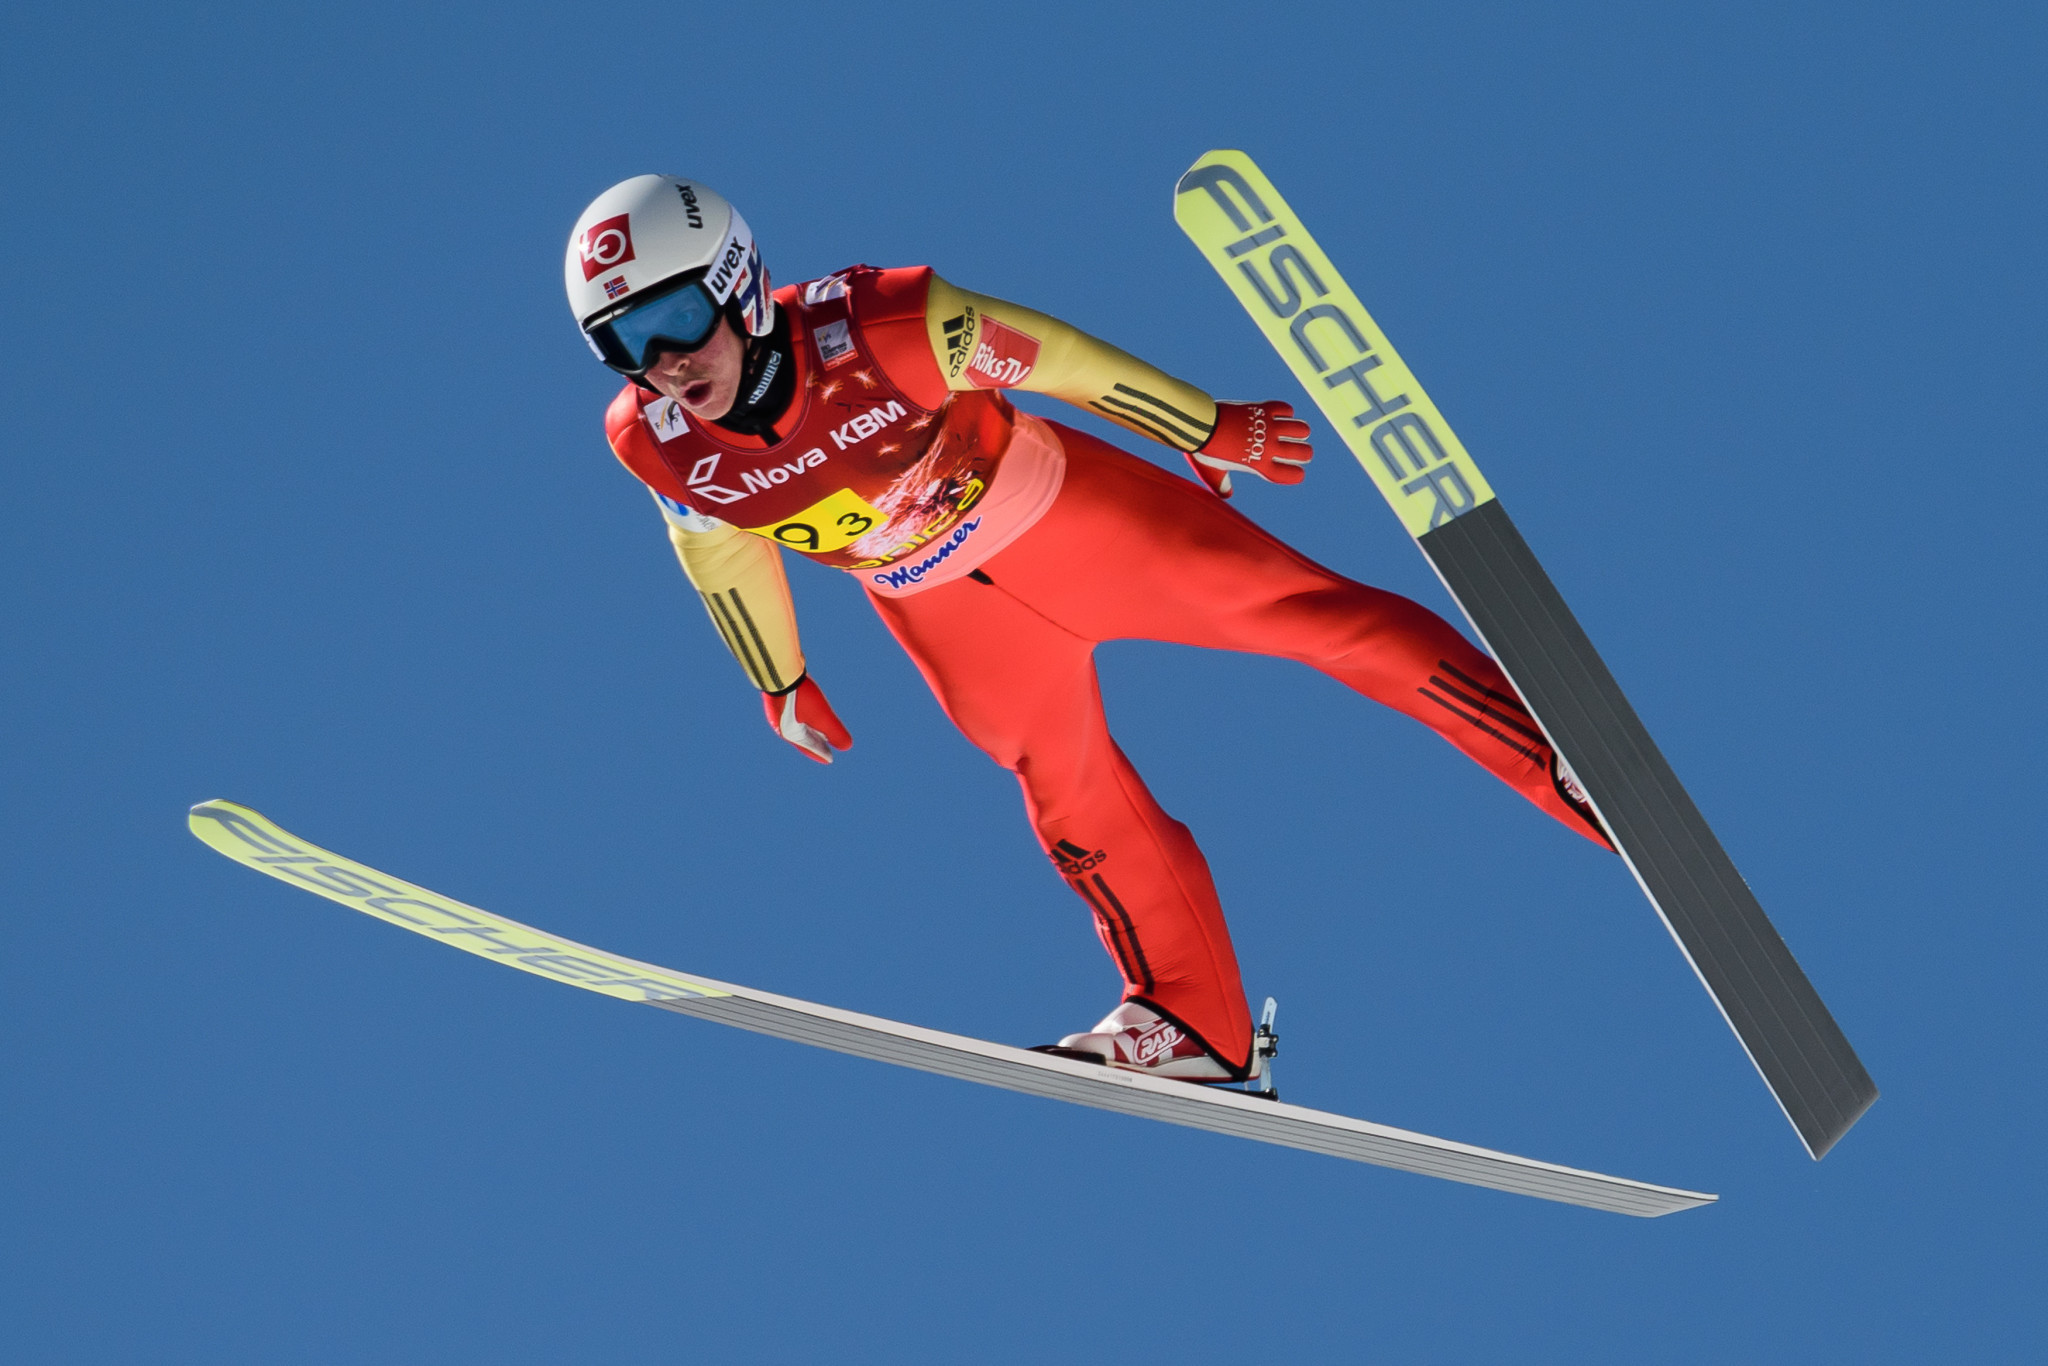 Anders Fannemel won the men's competition in Switzerland ©Getty Images 